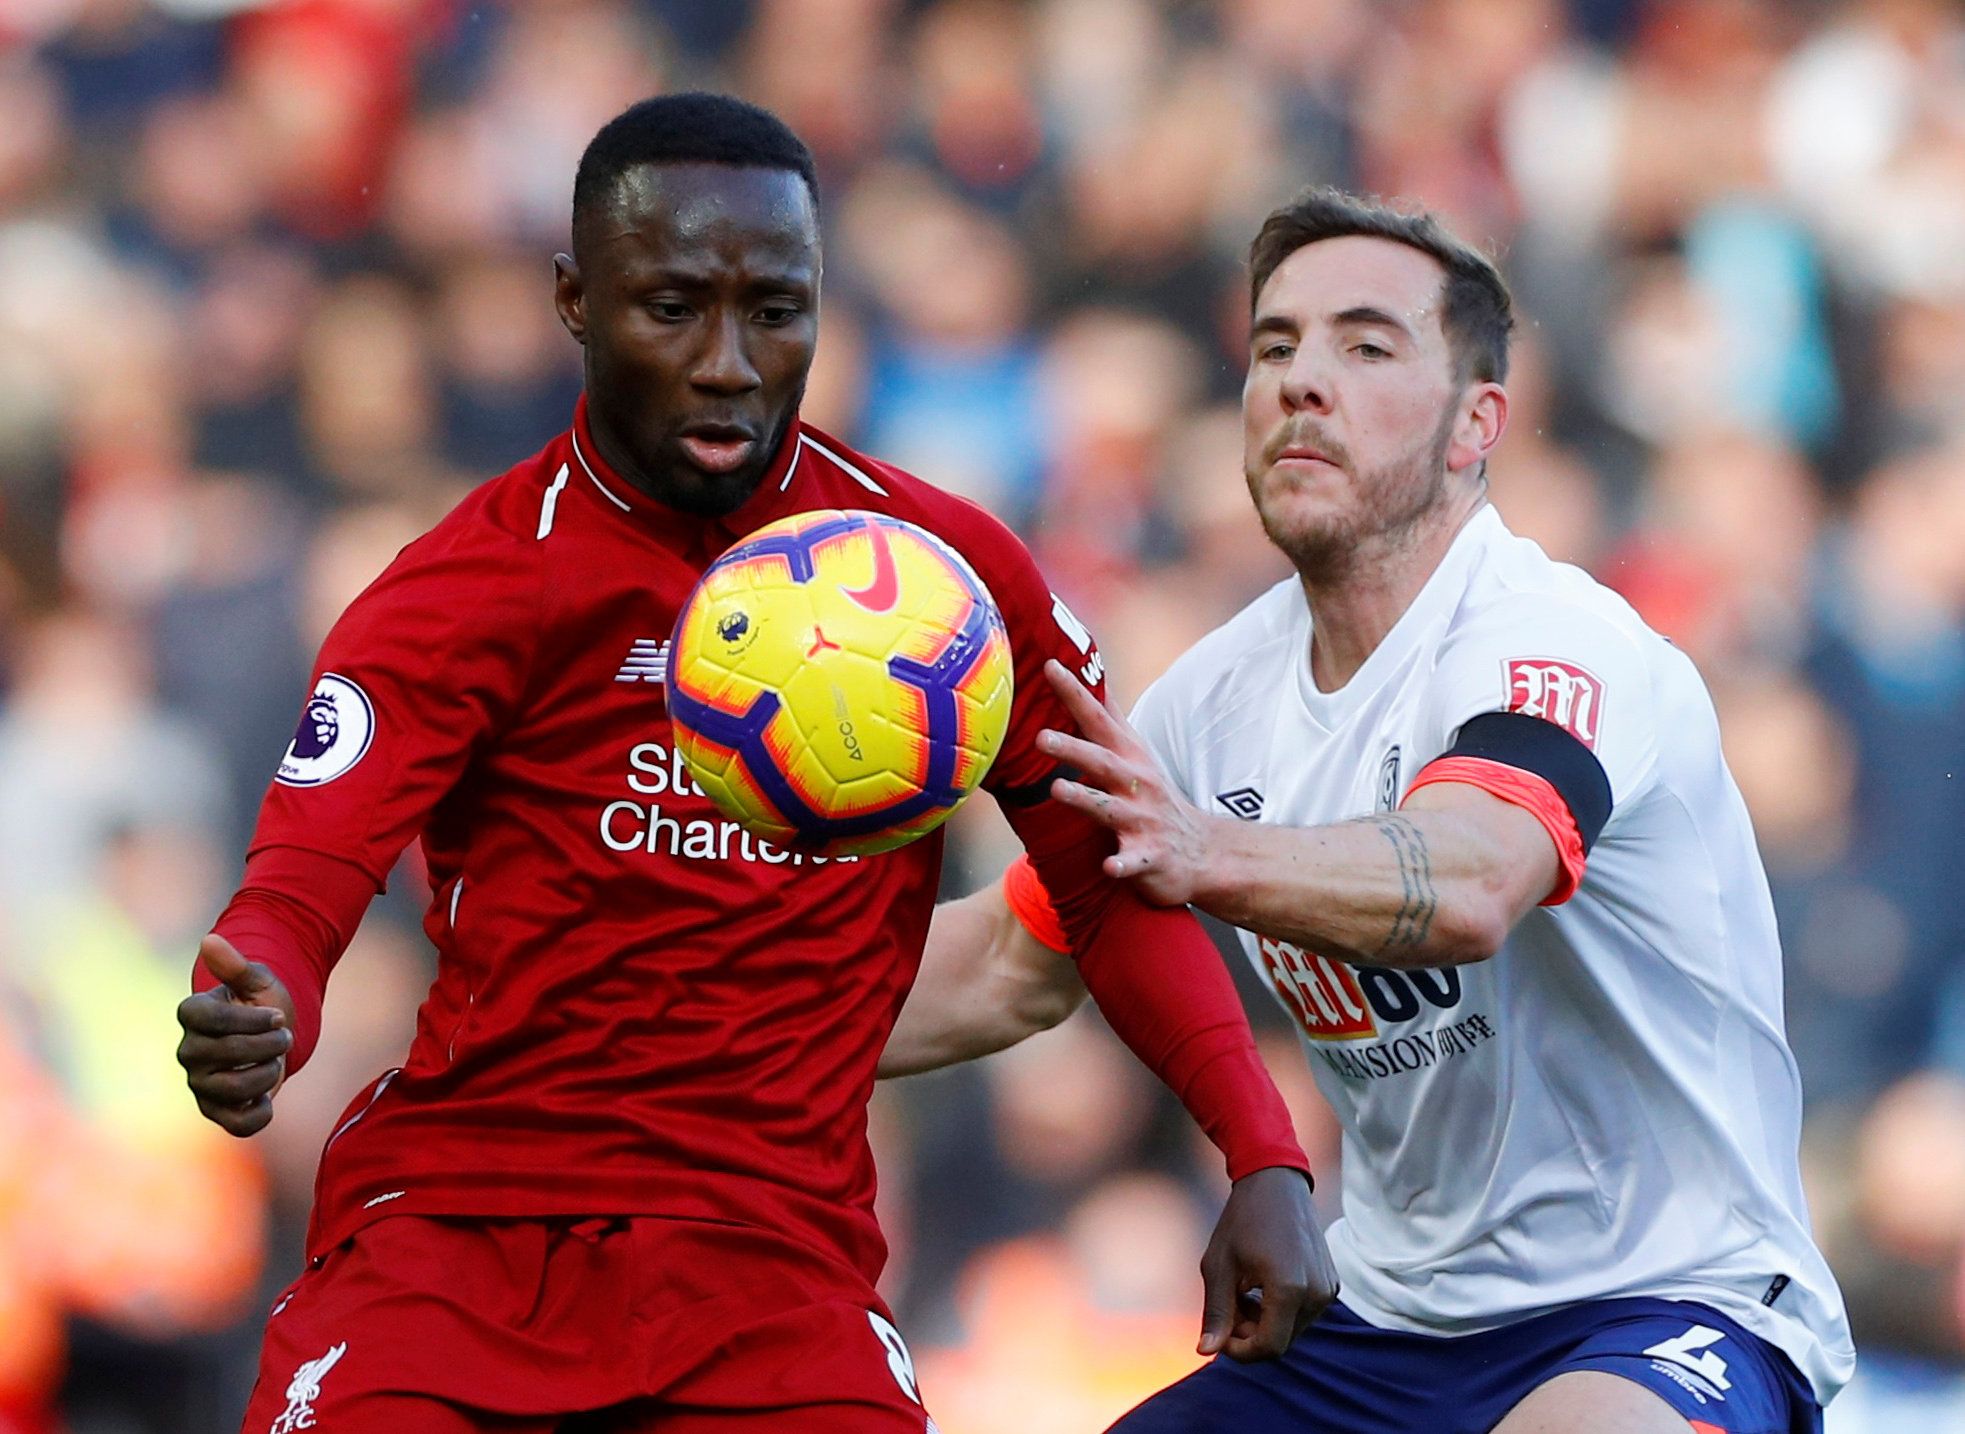 Soccer Football - Premier League - Liverpool v AFC Bournemouth - Anfield, Liverpool, Britain - February 9, 2019  Bournemouth's Dan Gosling in action with Liverpool's Naby Keita     REUTERS/Phil Noble  EDITORIAL USE ONLY. No use with unauthorized audio, video, data, fixture lists, club/league logos or 